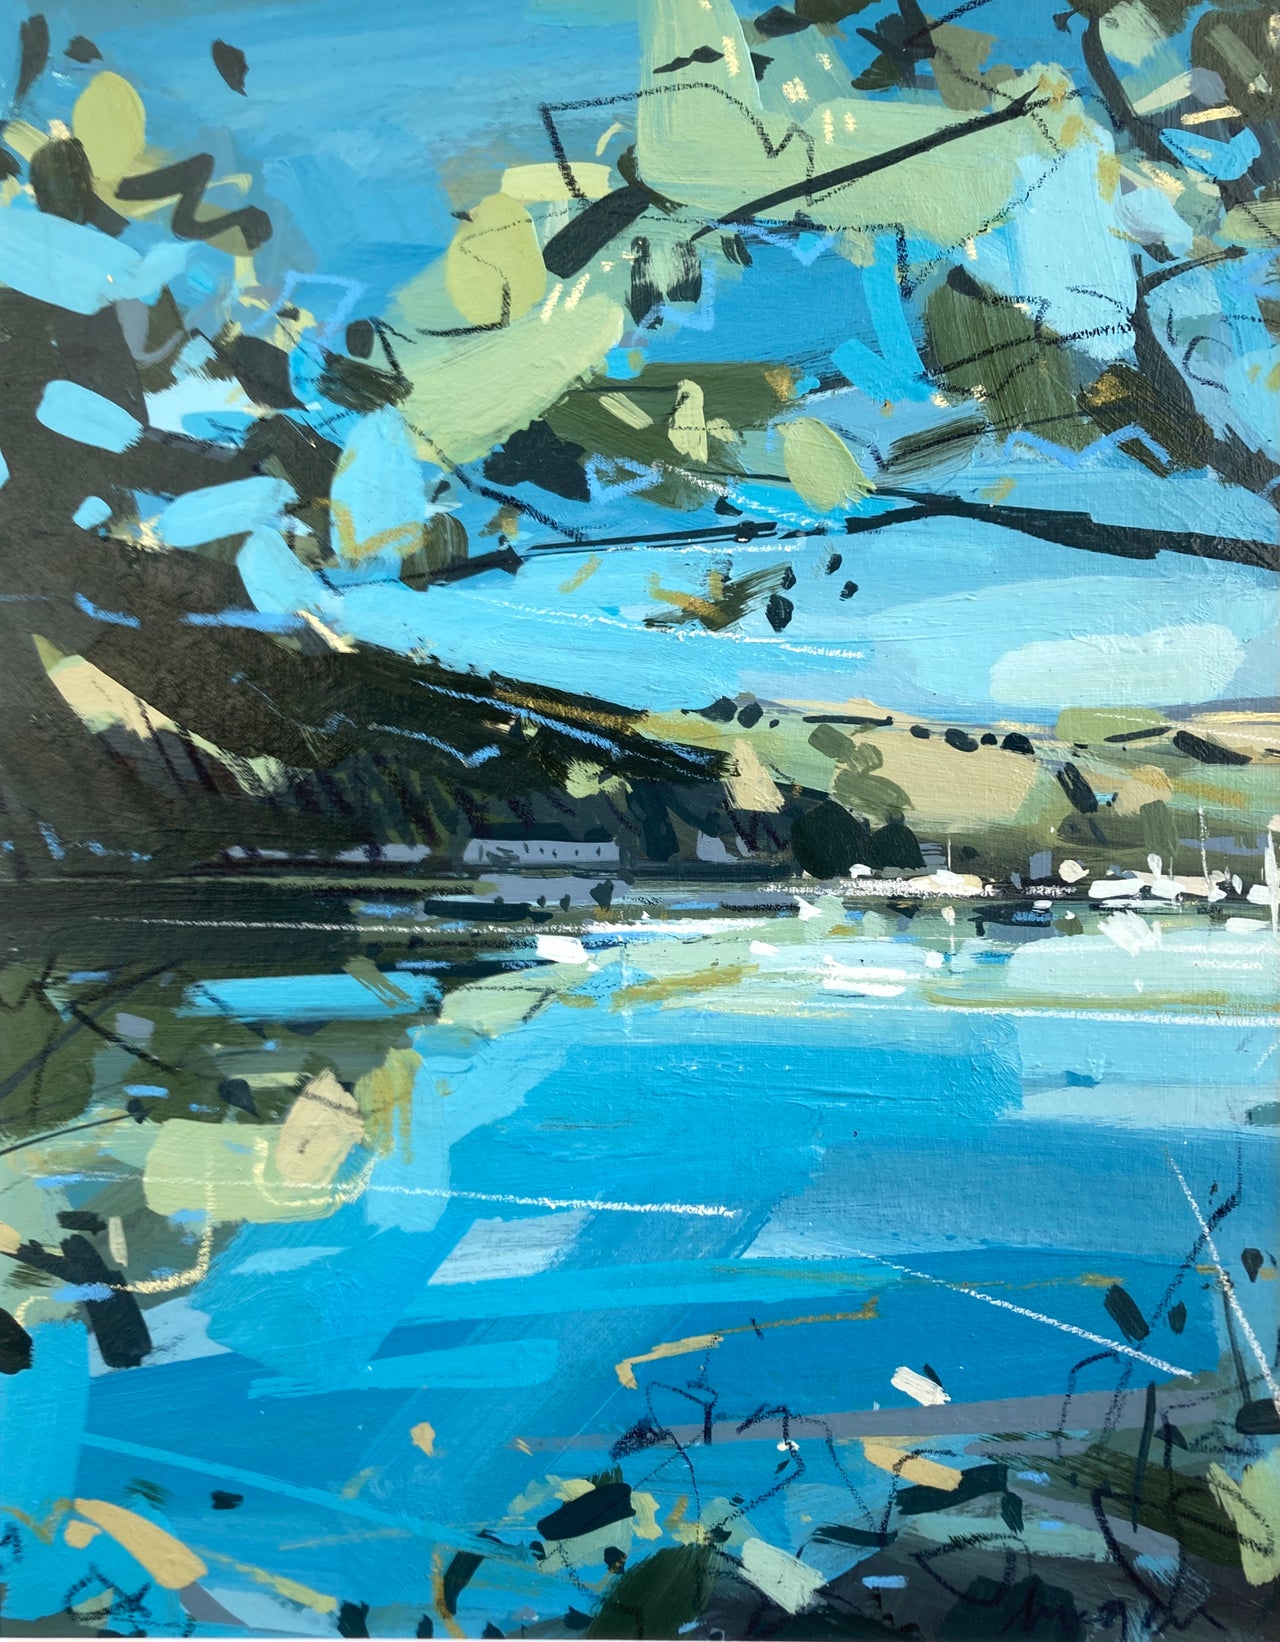 Headland in background with boats moored in the water, foliage in foreground in tones of blues and greens by artist Imogen Bone